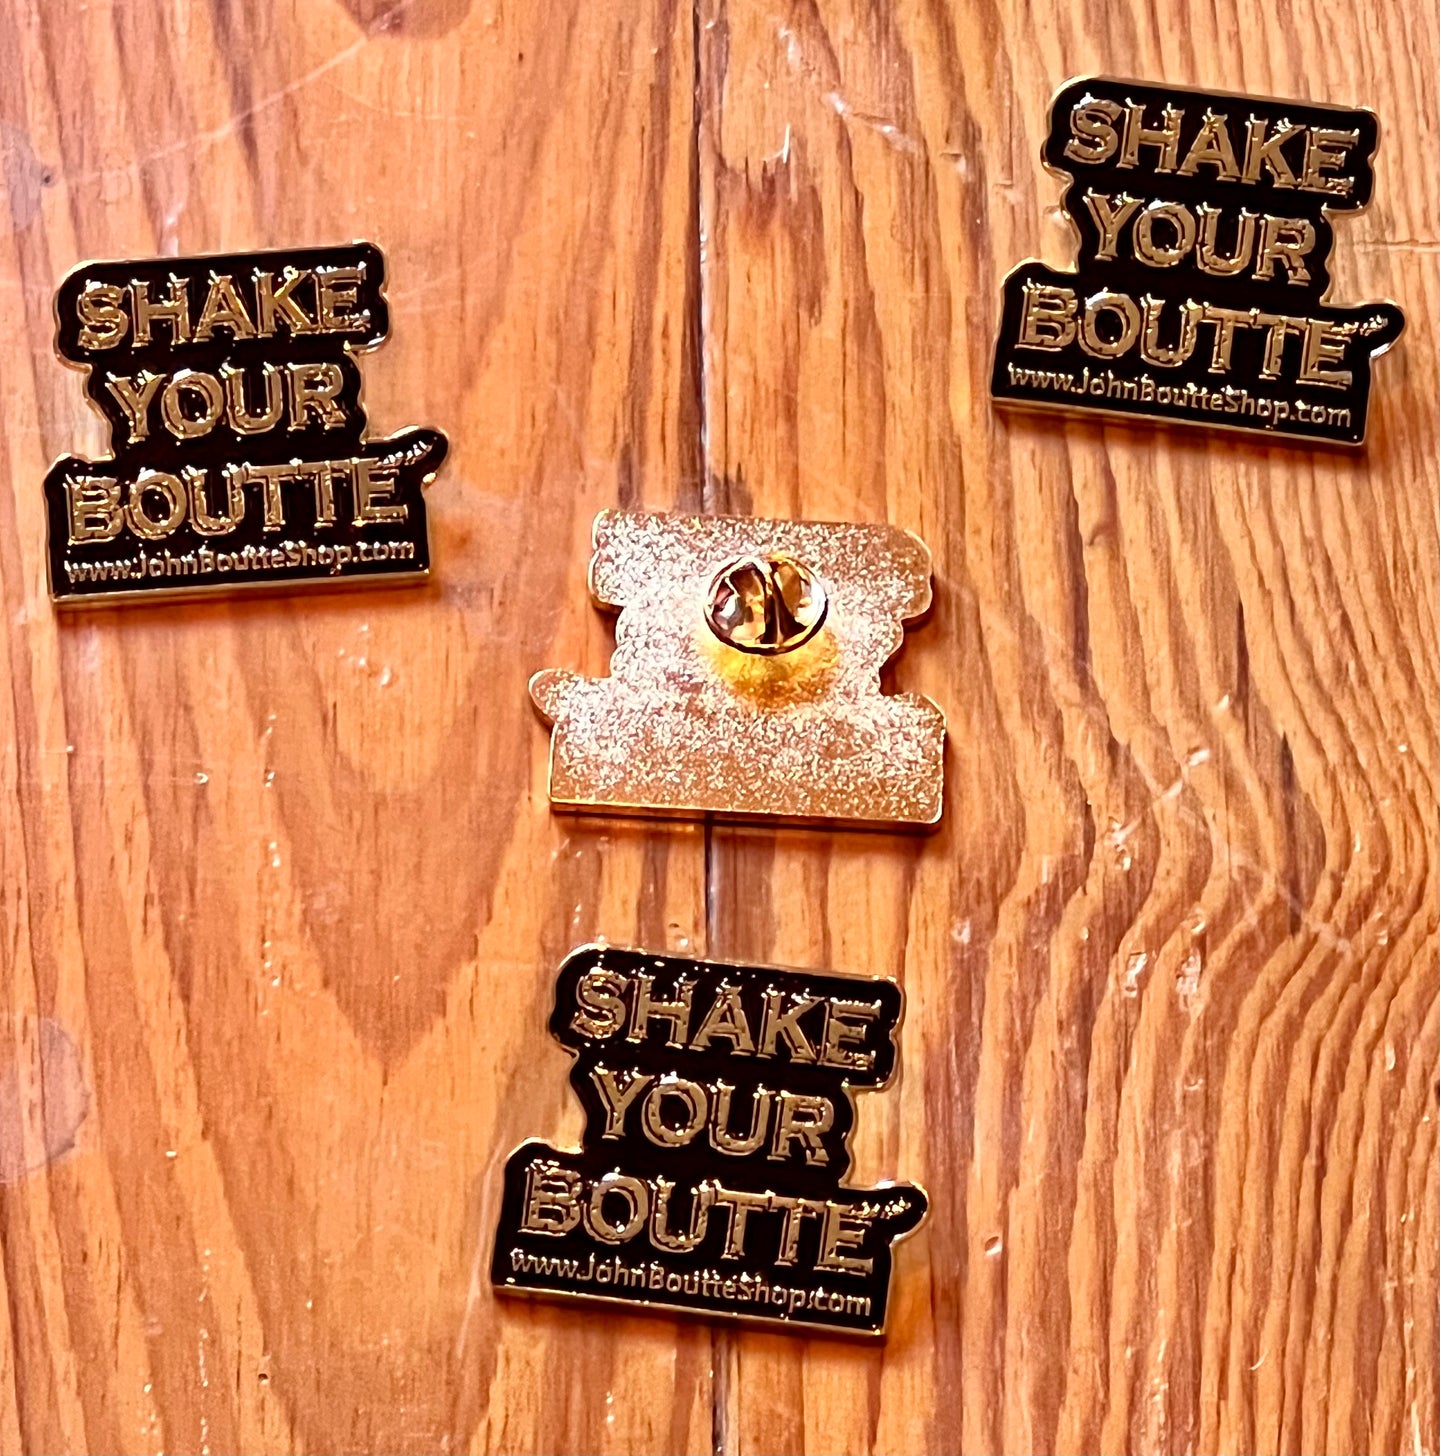 Shake Your Boutte´enamel pins